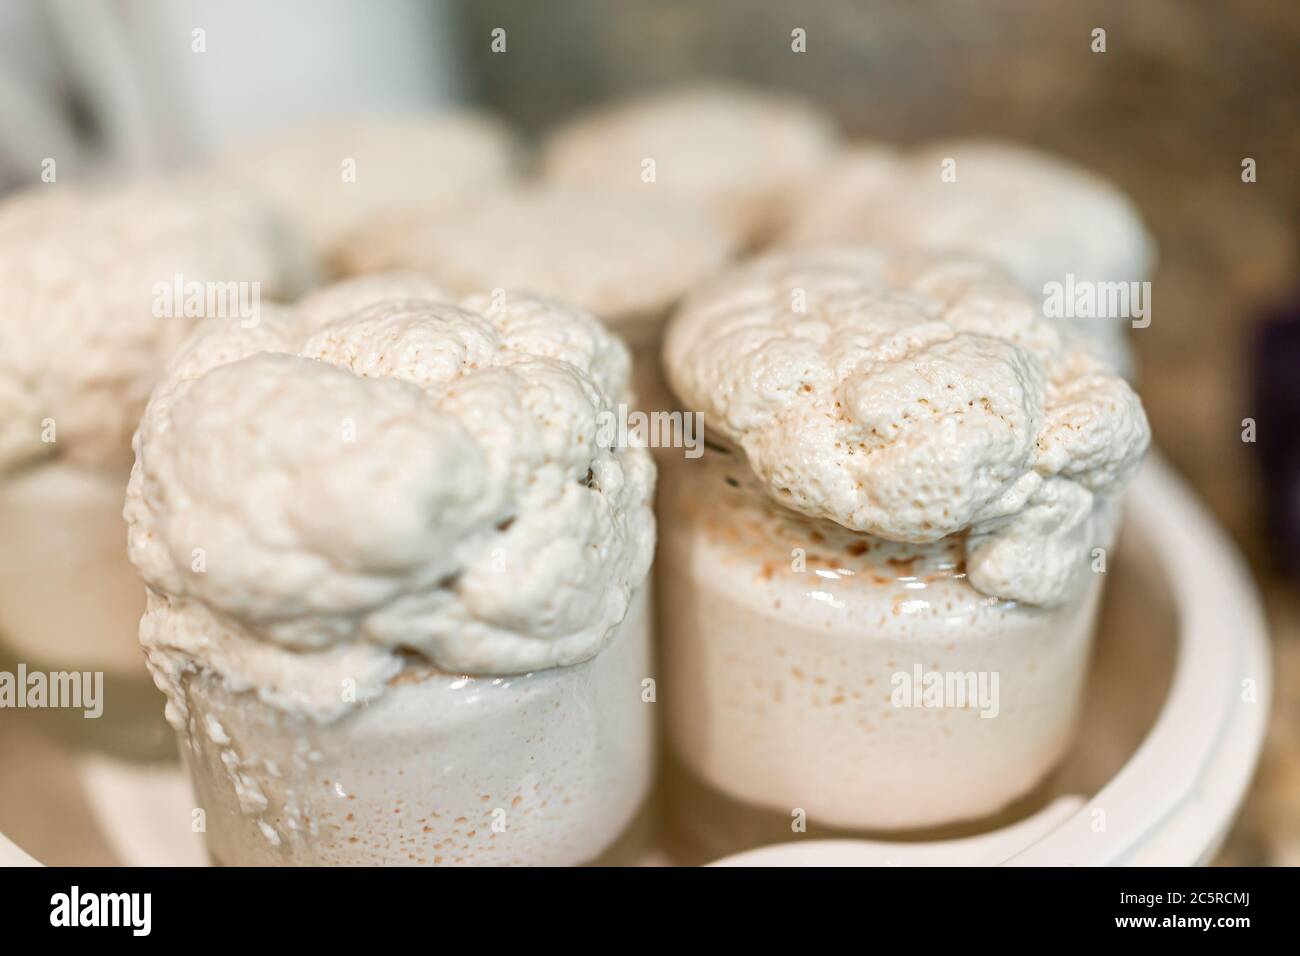 Closeup macro of glass container jars with white cream homemade yogurt in machine maker with yeast contamination problem in probiotic culture Stock Photo